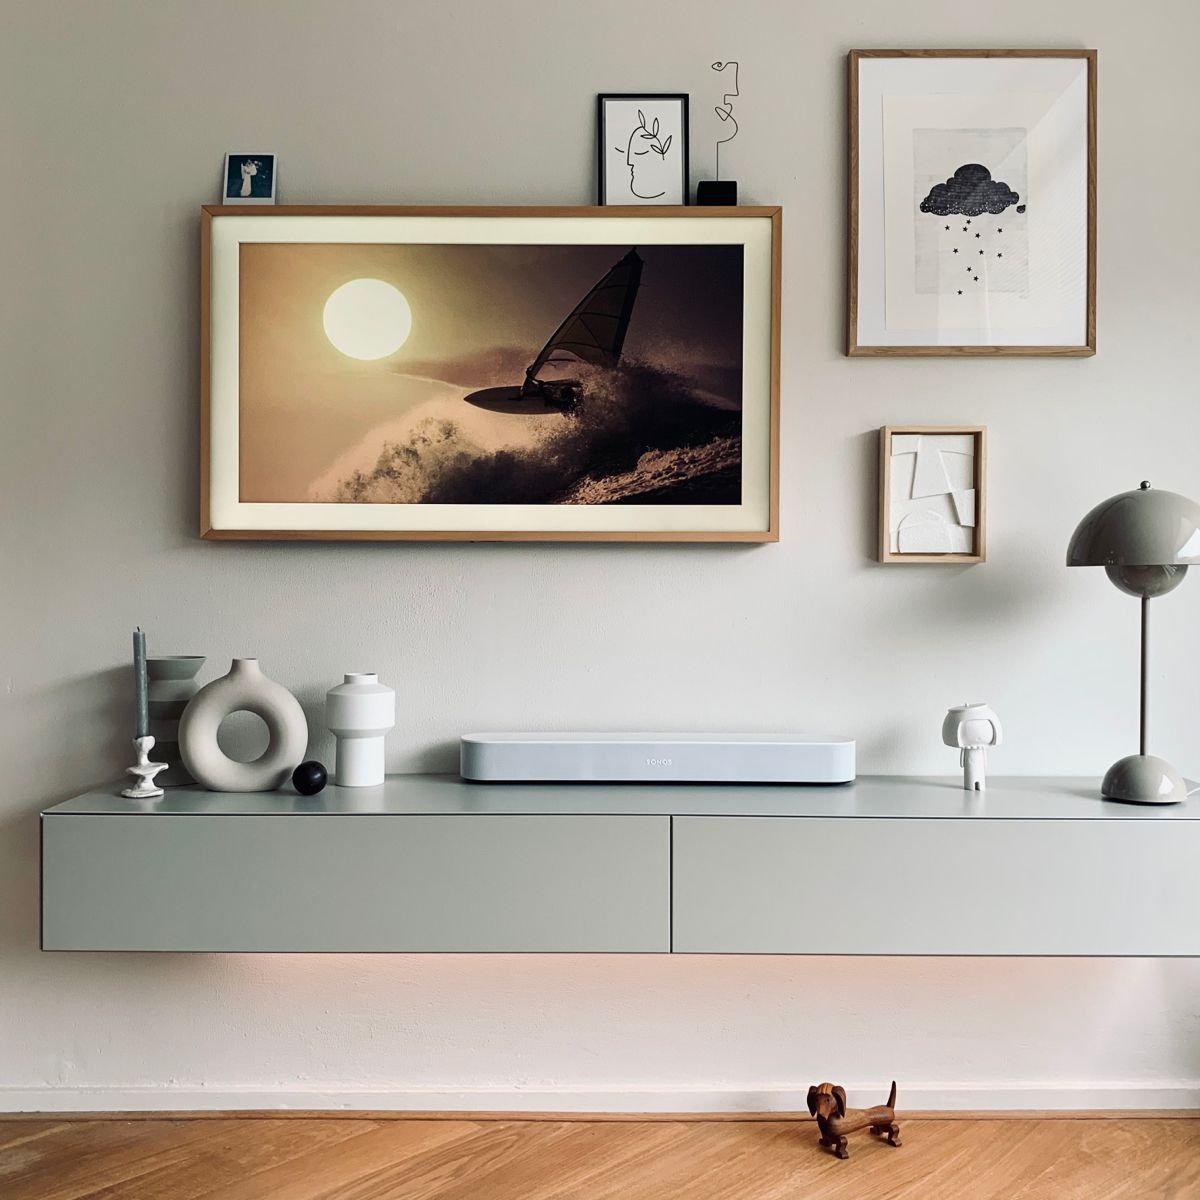 Minimalistic style home featuring Sonos Beam